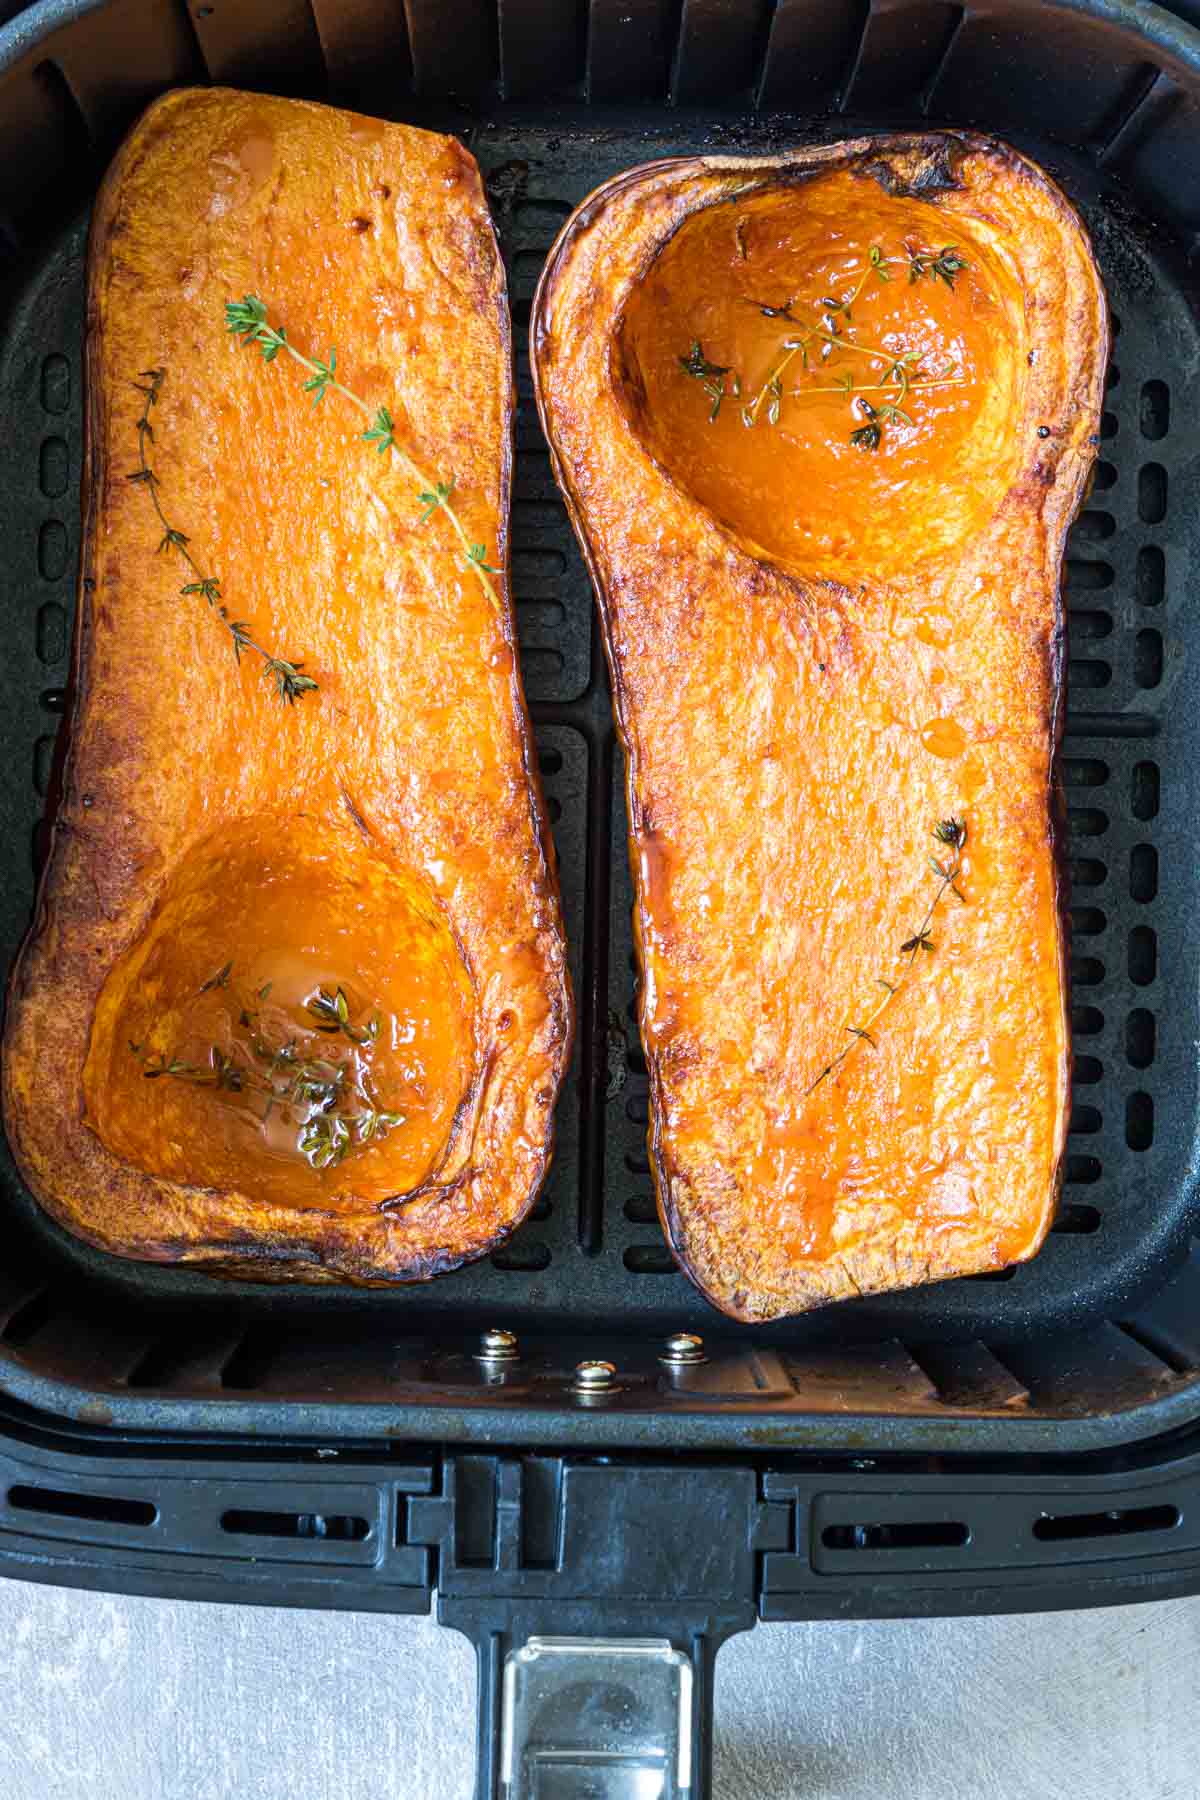 the finished squash recipe in the air fryer basket